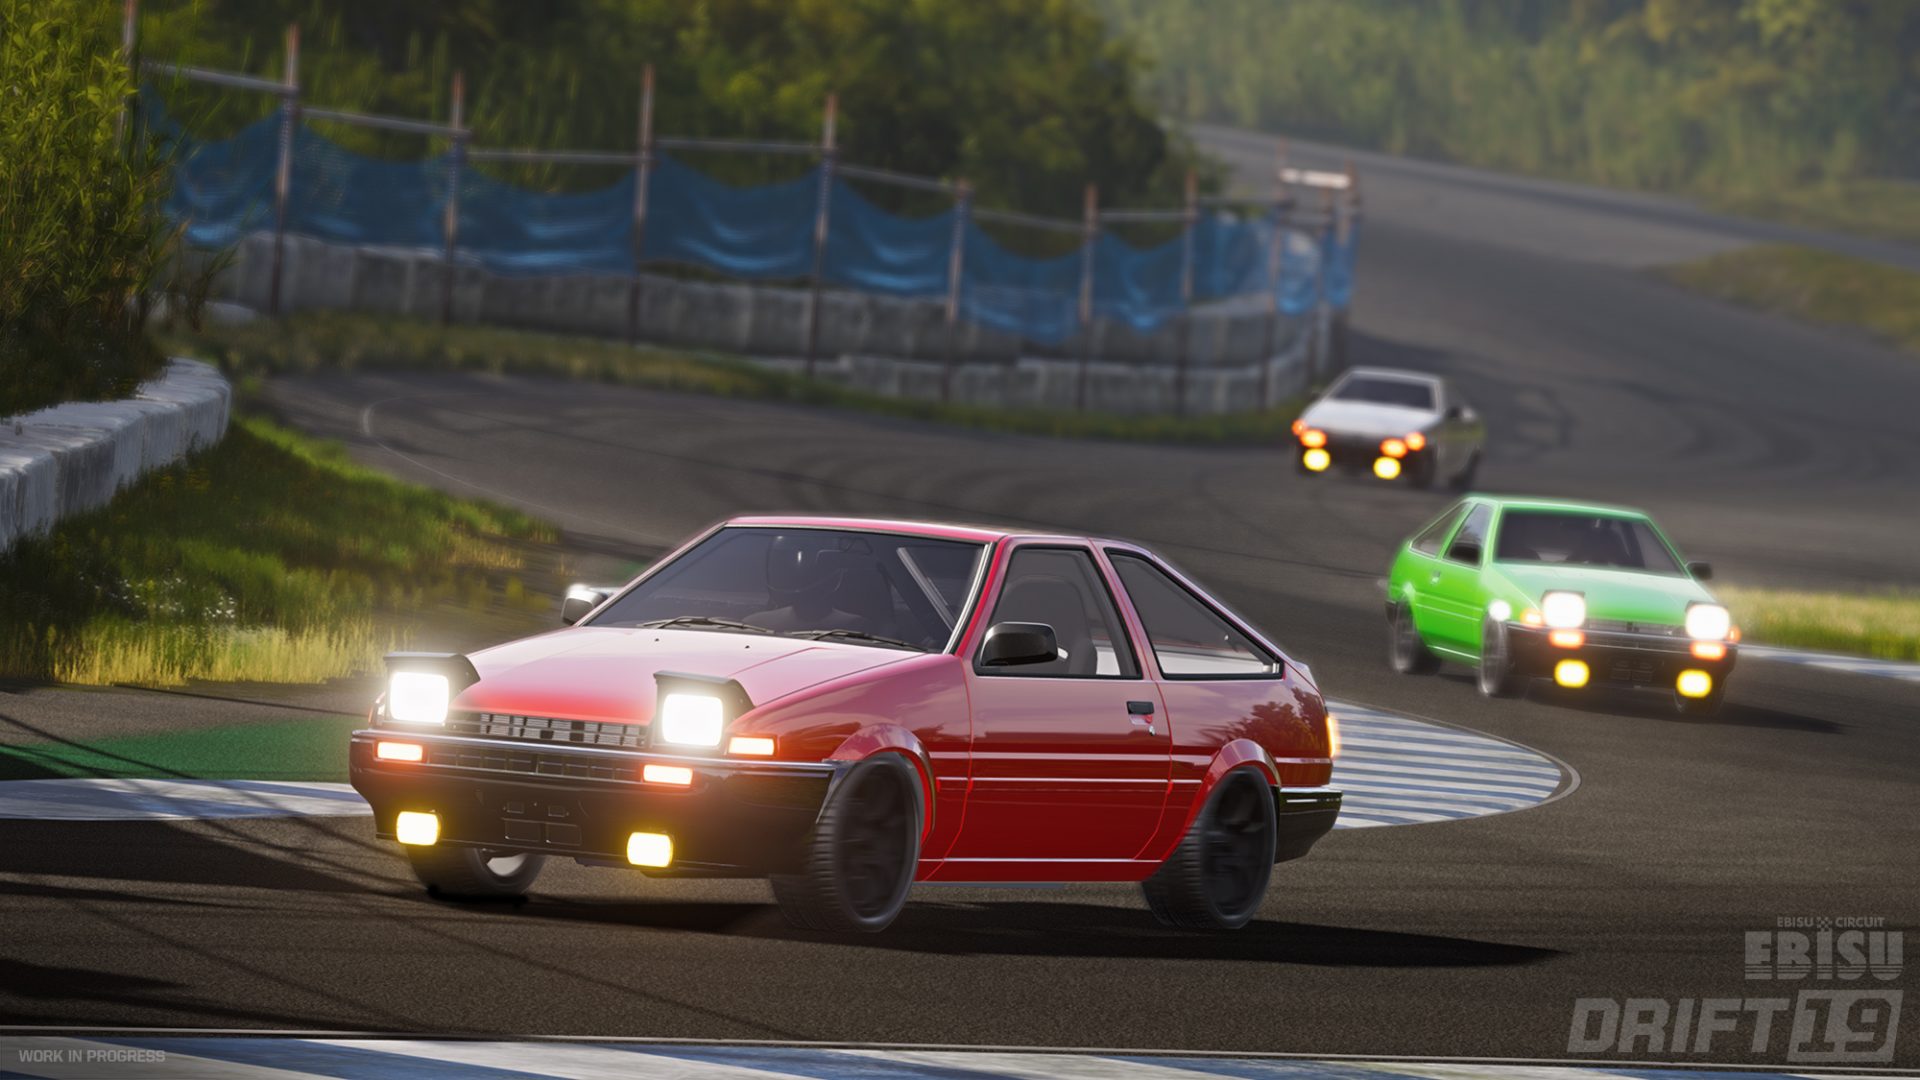 Drift 19 is the first and only serious drifting simulator coming to PS4,  Xbox One & PC - Team VVV